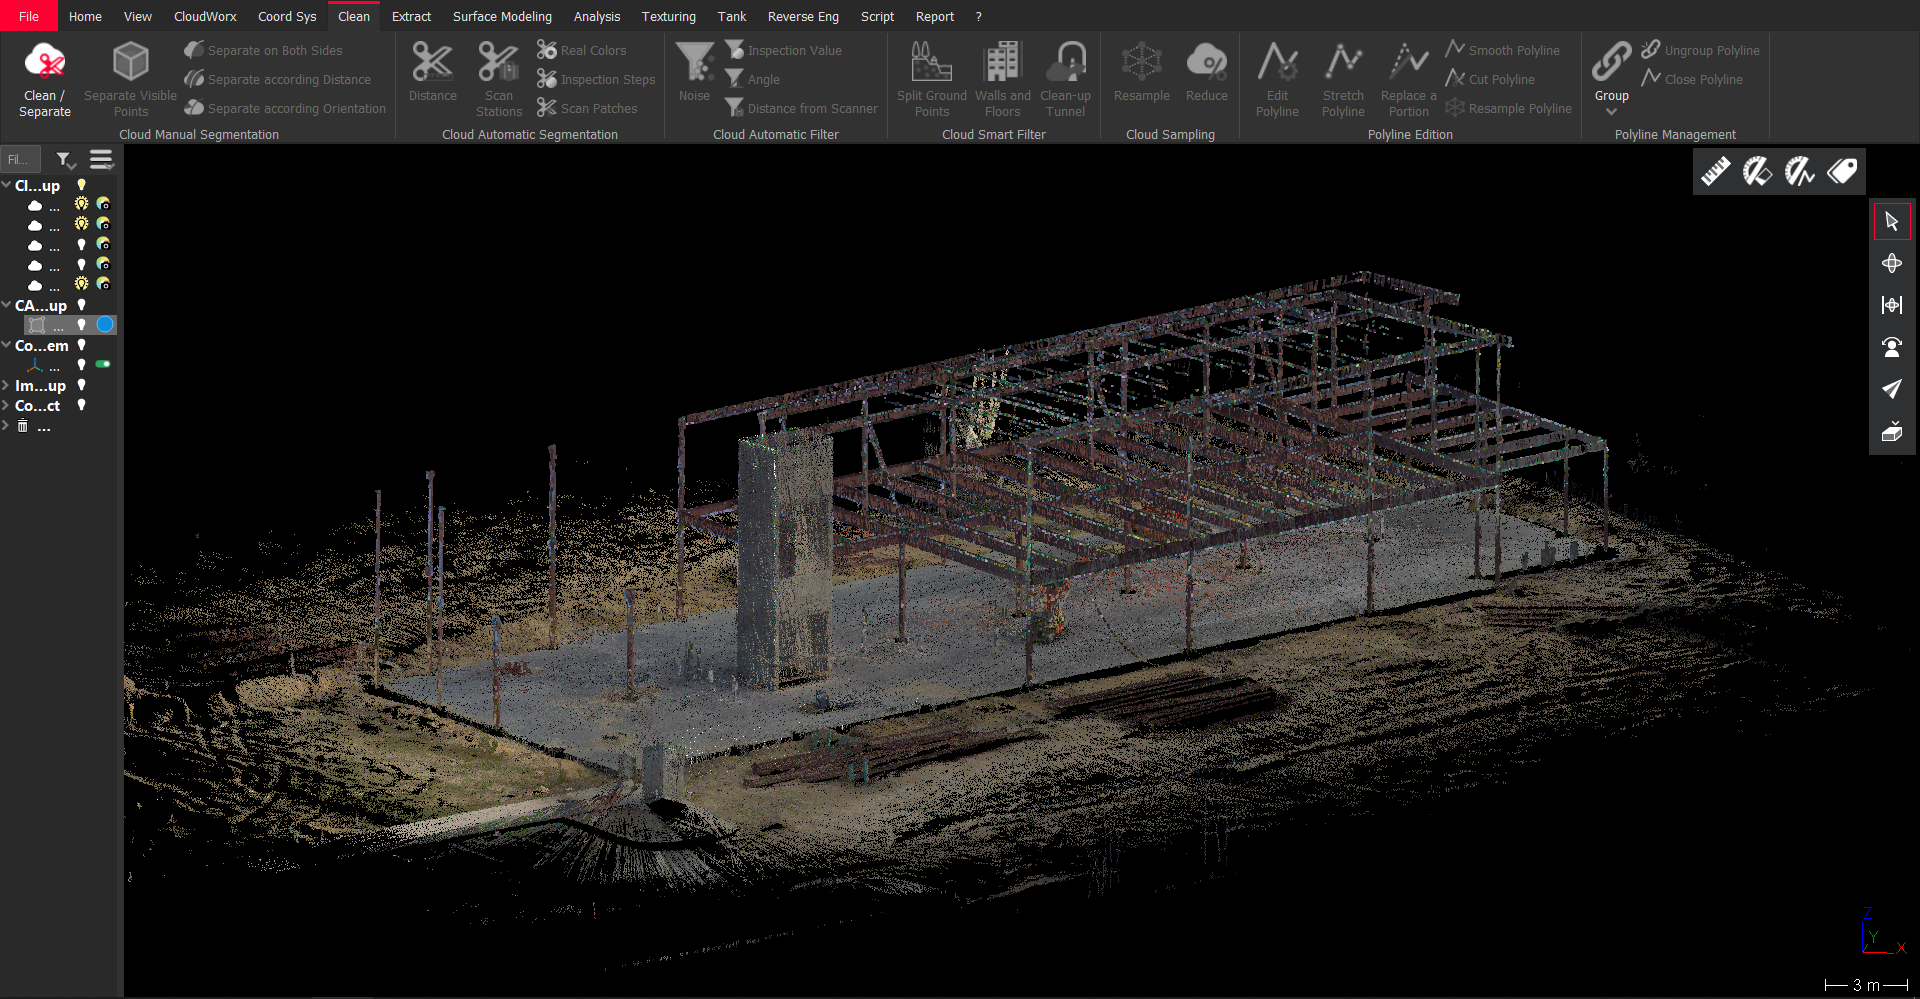 Screenshot of Leica BLK2GO Point Cloud in Cyclone 3DR software